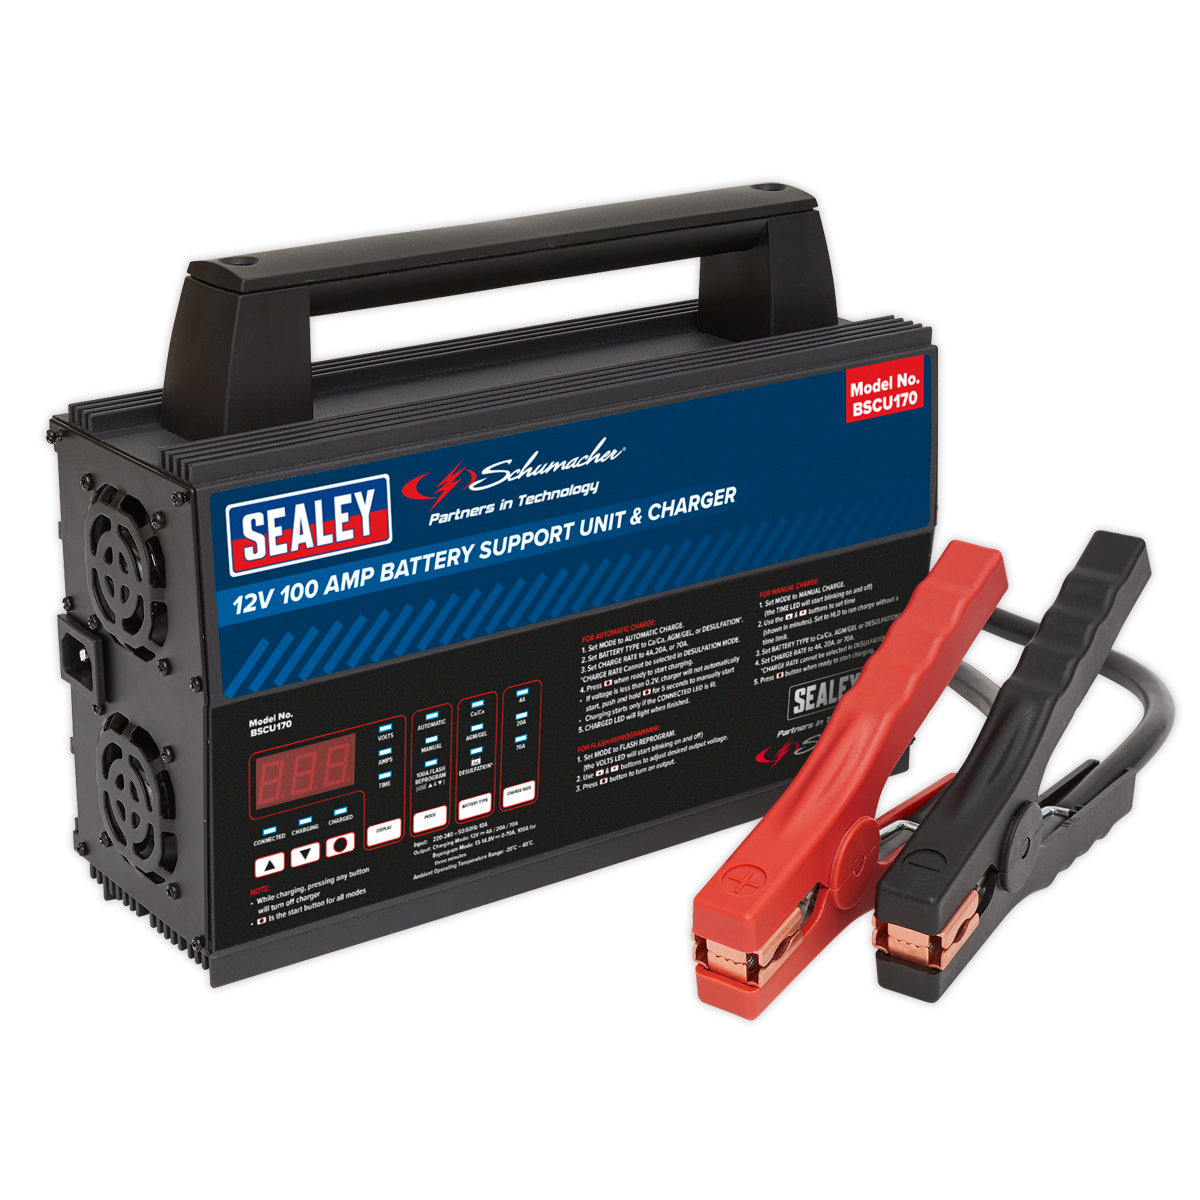 SEALEY - BSCU170 Schumacher® Battery Support Unit & Charger - 12V 100A